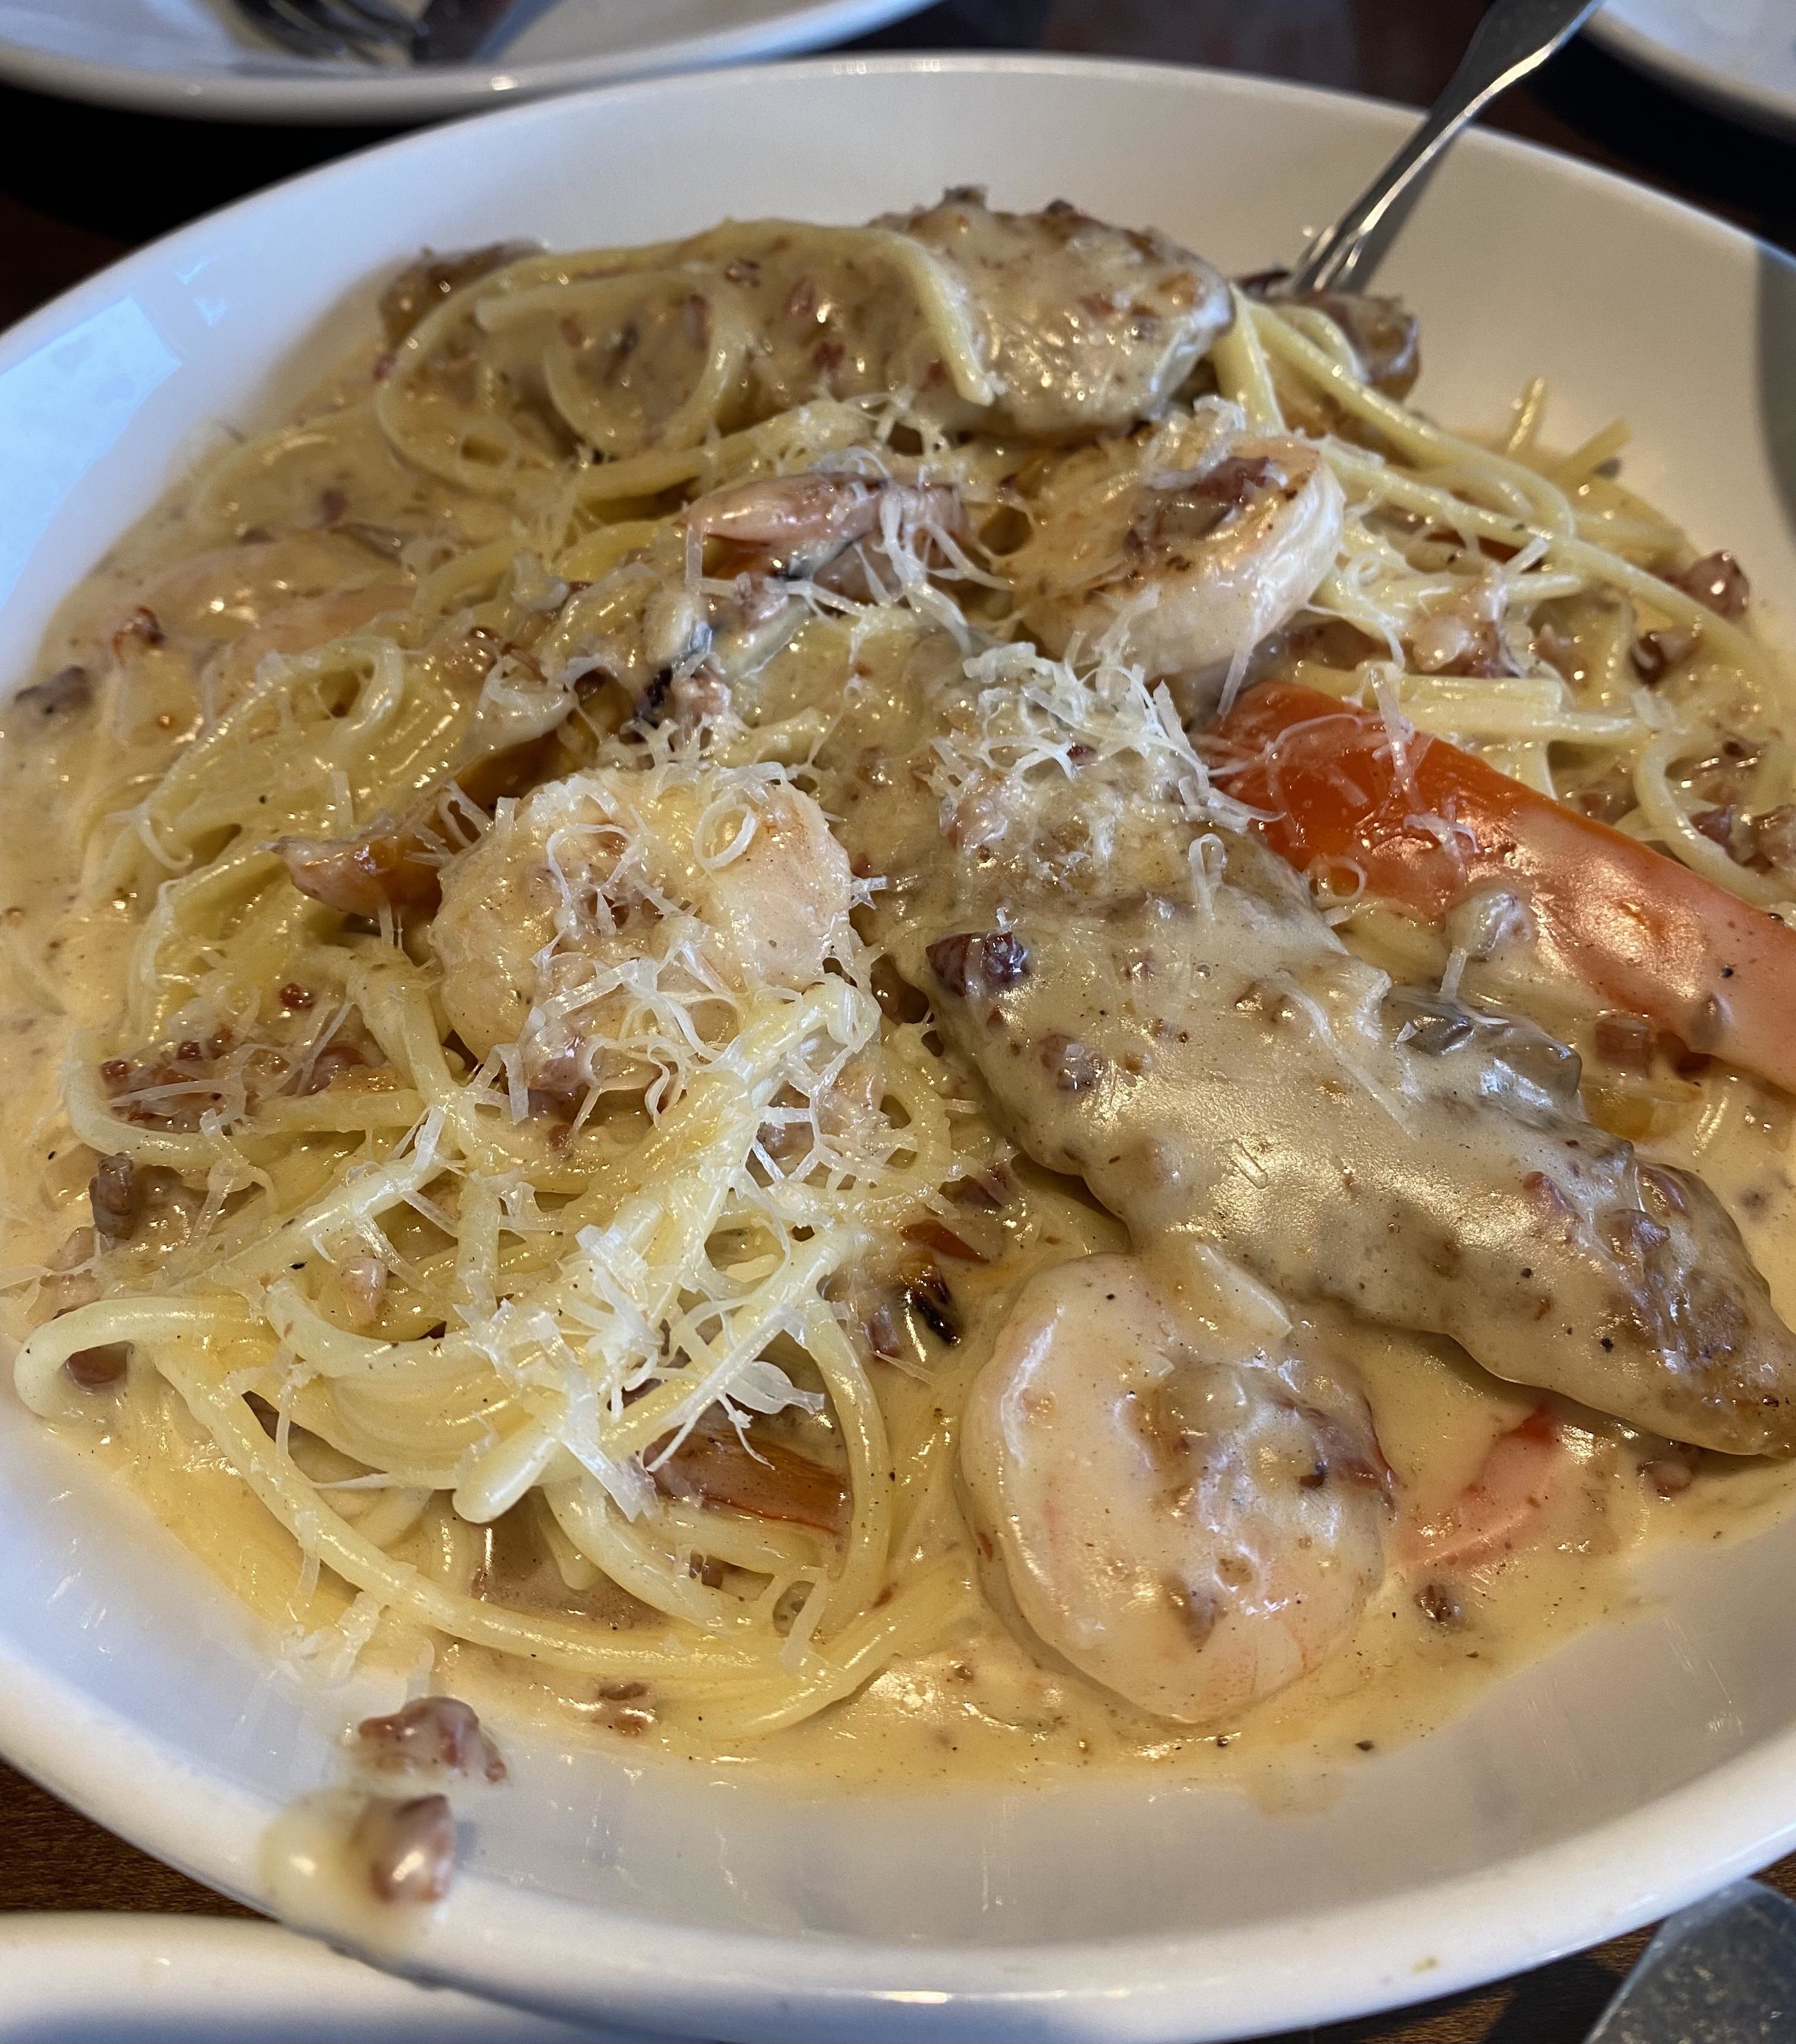 A plate of spaghetti with creamy sauce, chicken, shrimp, and sprinkled cheese